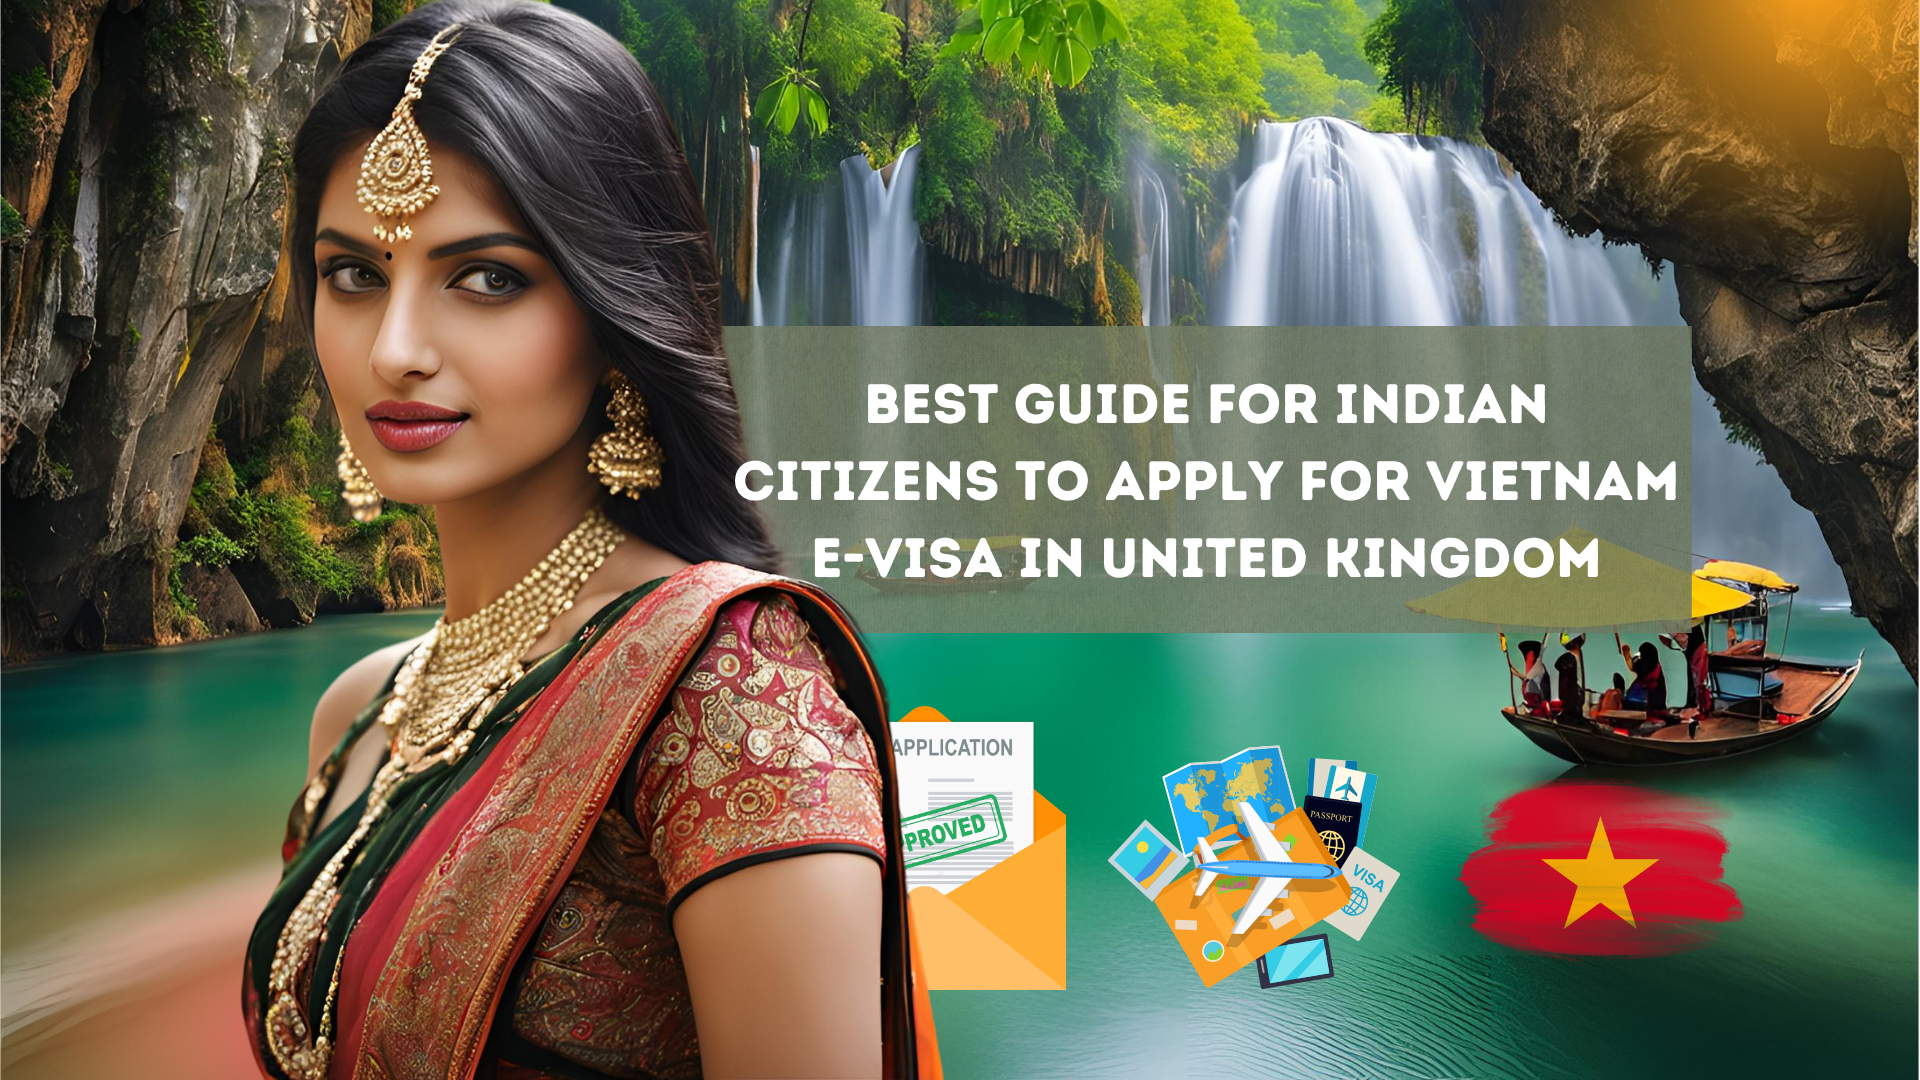 Best Guide for Indian Citizens to Apply for Vietnam E-Visa in United Kingdom